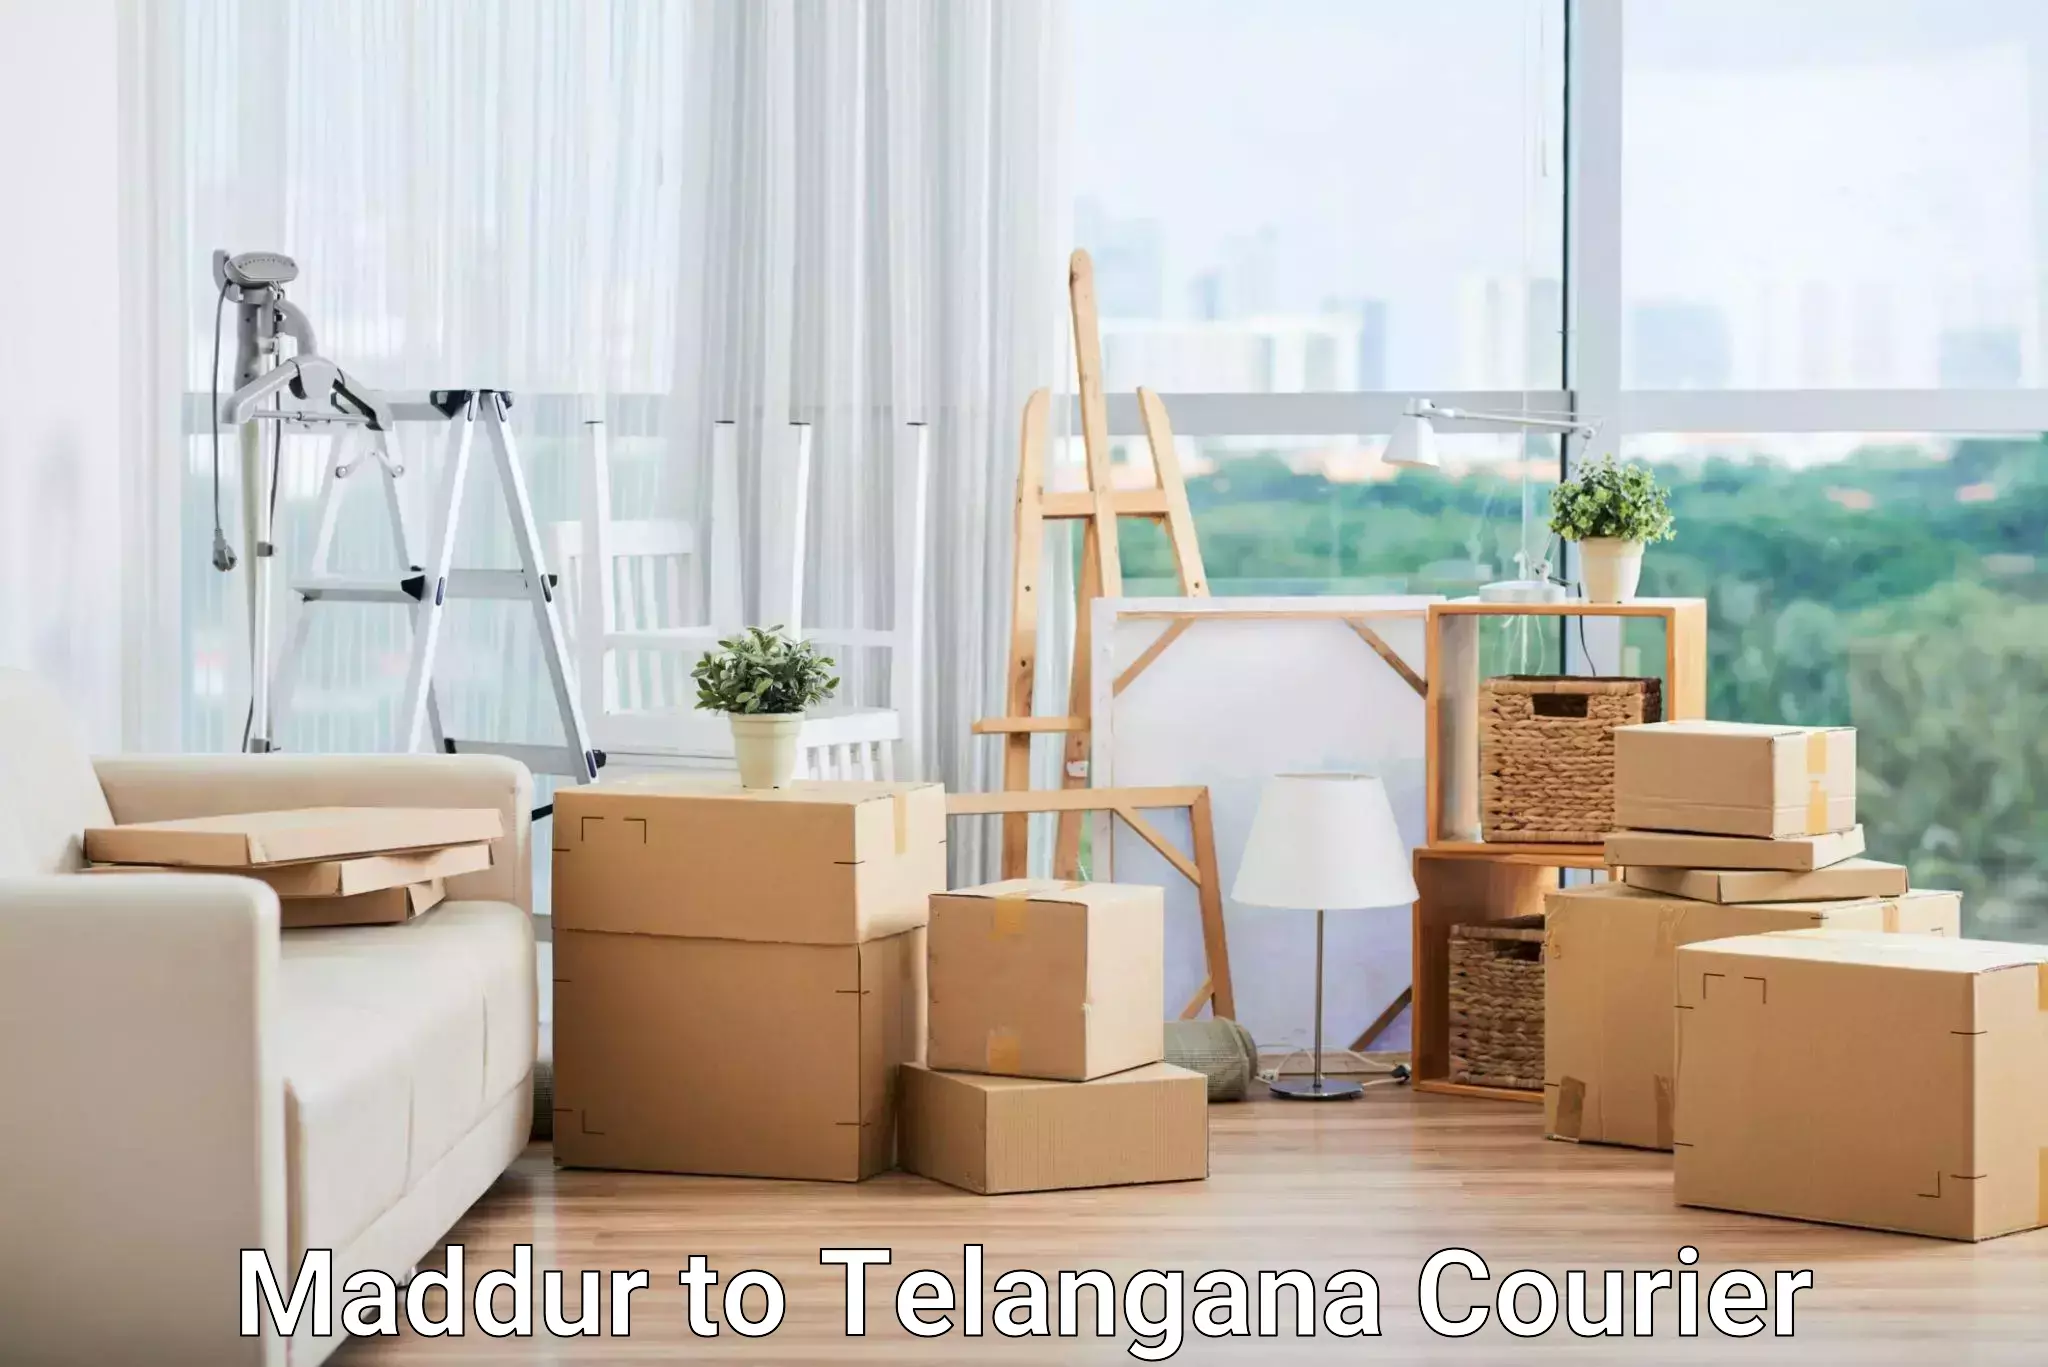 Multi-national courier services in Maddur to Ibrahimpatnam